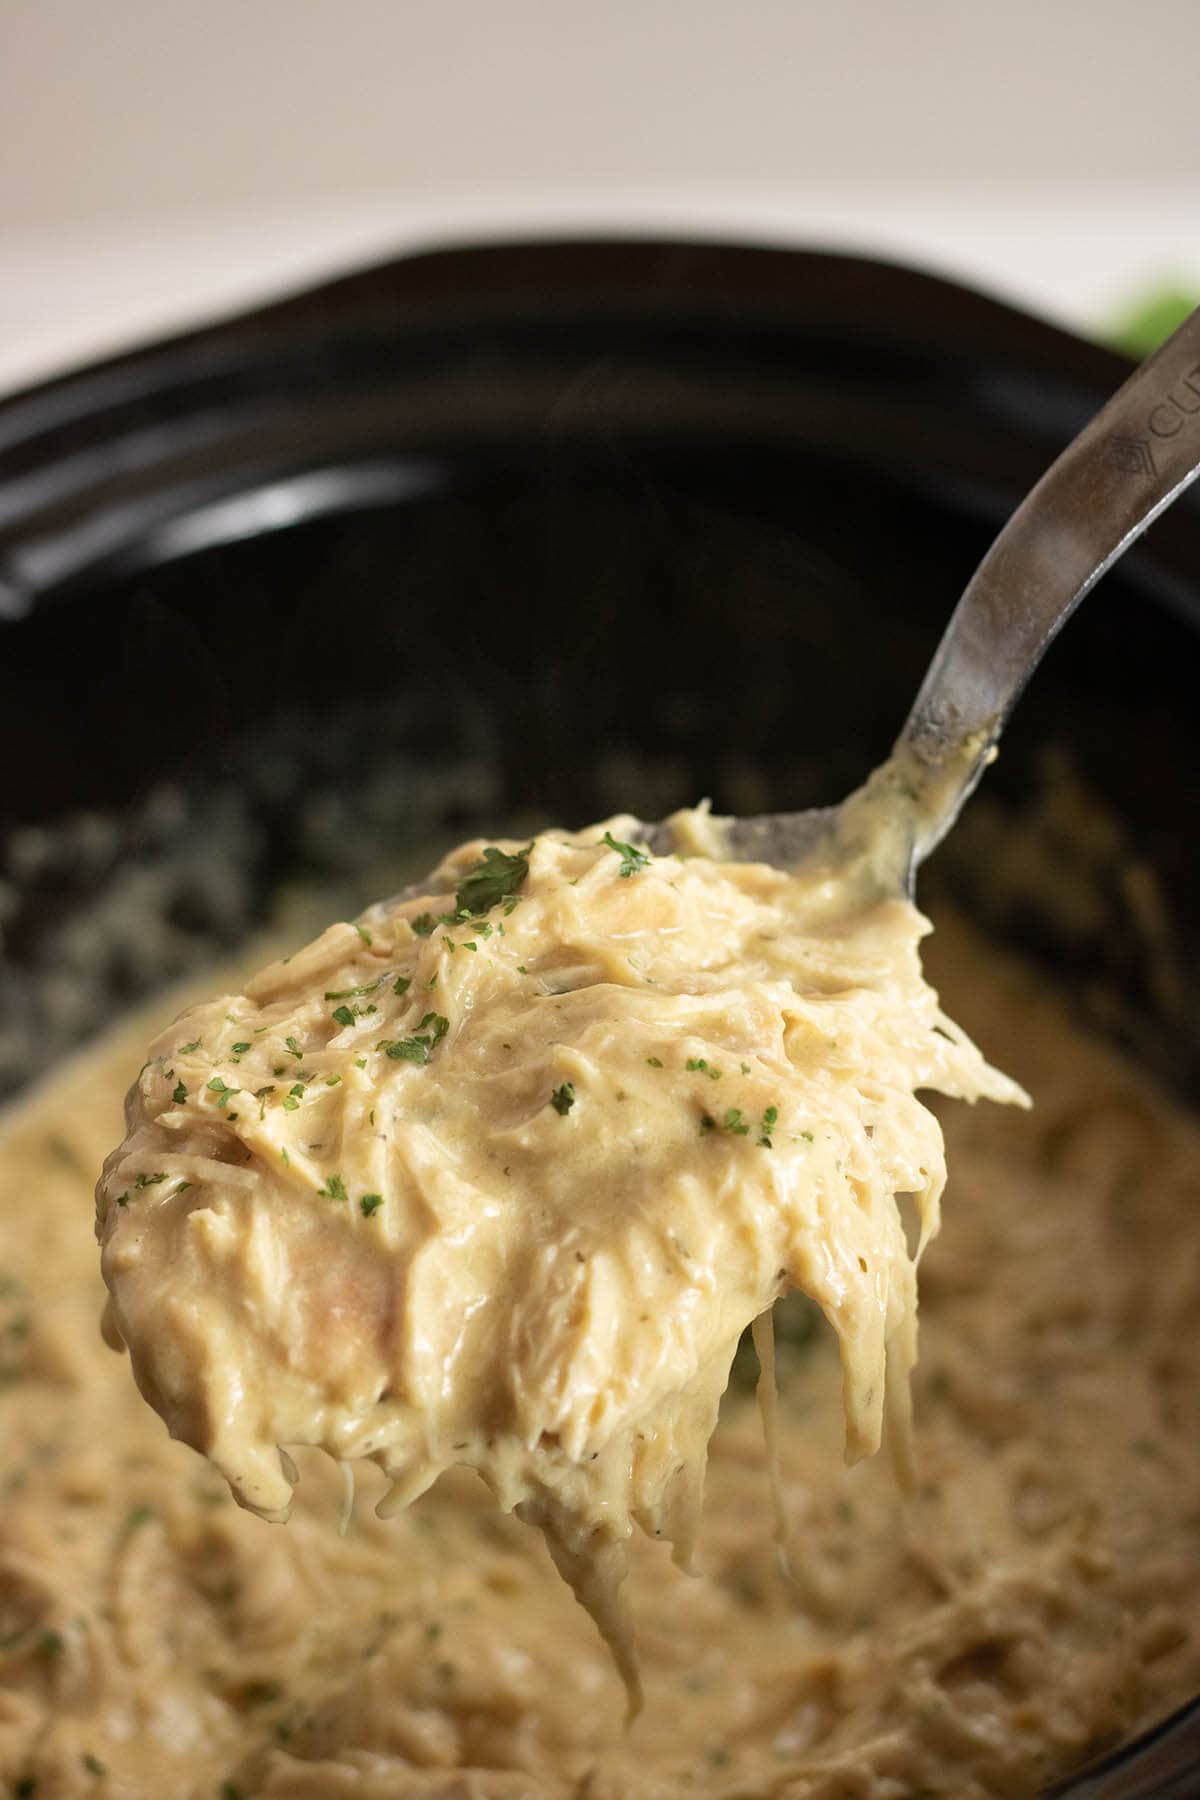 Juicy shredded ranch chicken in slow cooker with serving spoon.